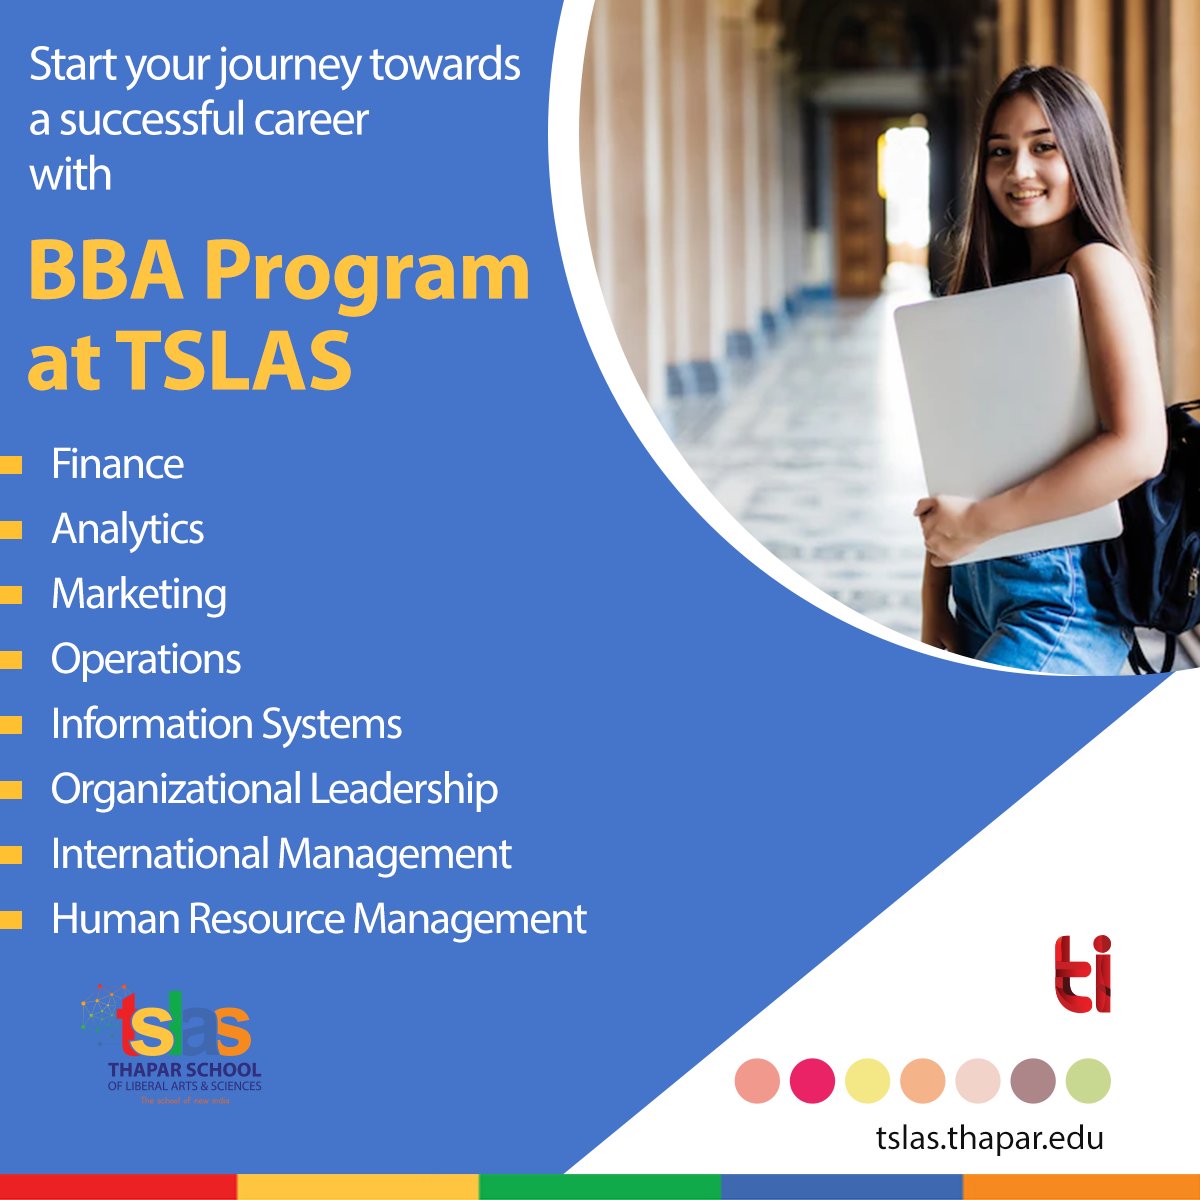 The BBA program at TSLAS gives students the skills, values, and knowledge they need to develop strategic business insight, make moral decisions, and adopt a sustainable perspective.

#TSLAS  #BBAProgram